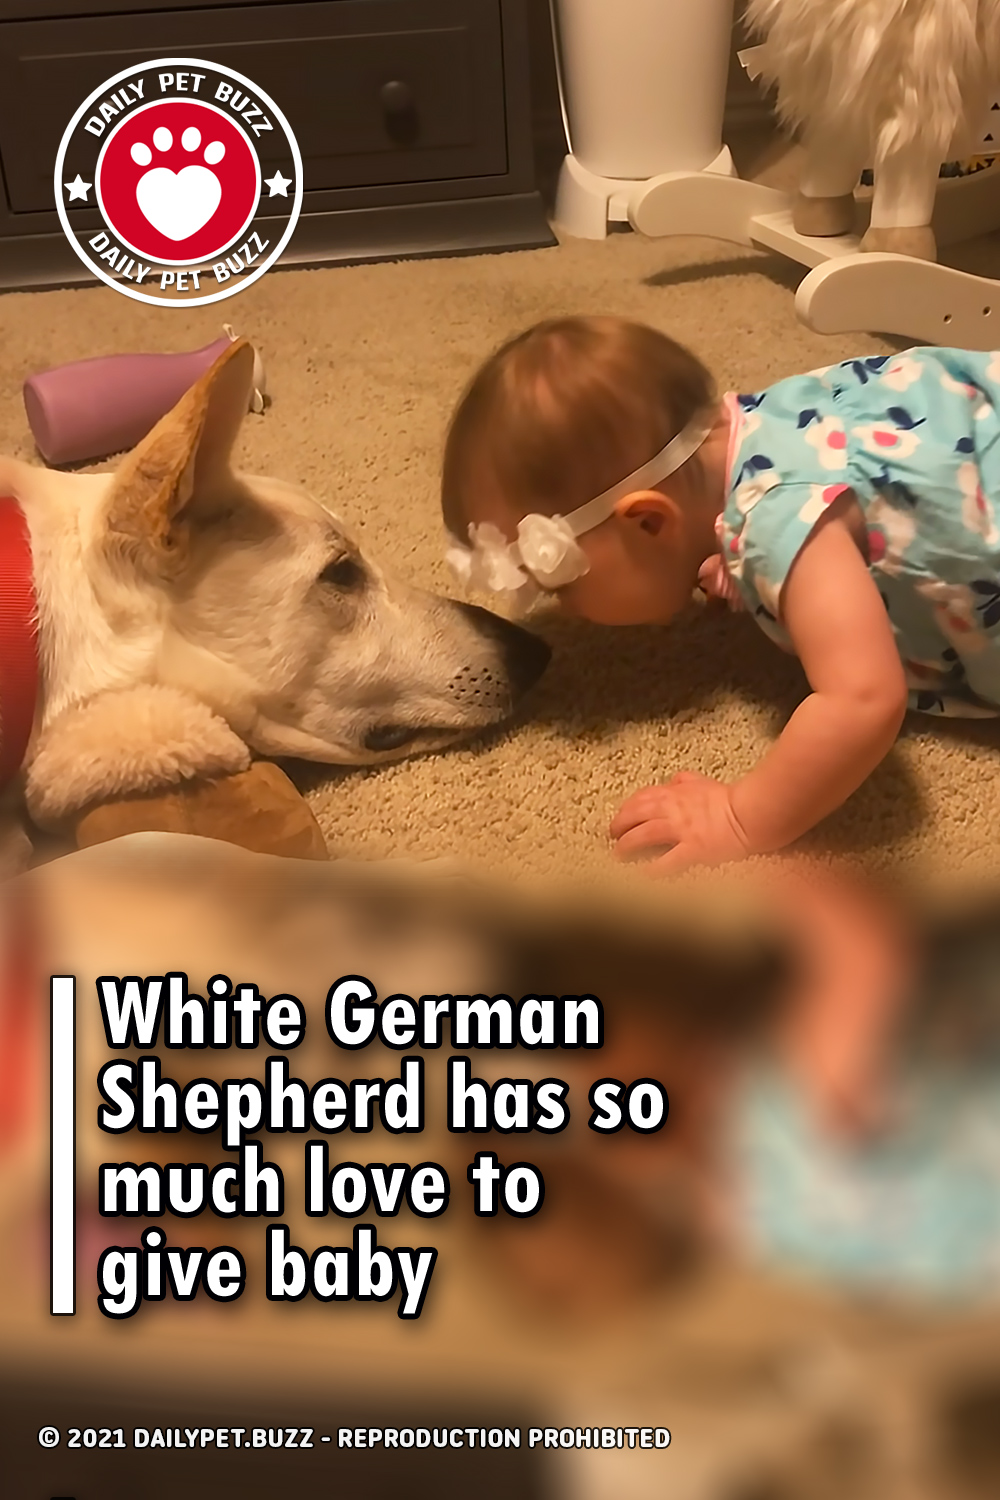 White German Shepherd has so much love to give baby